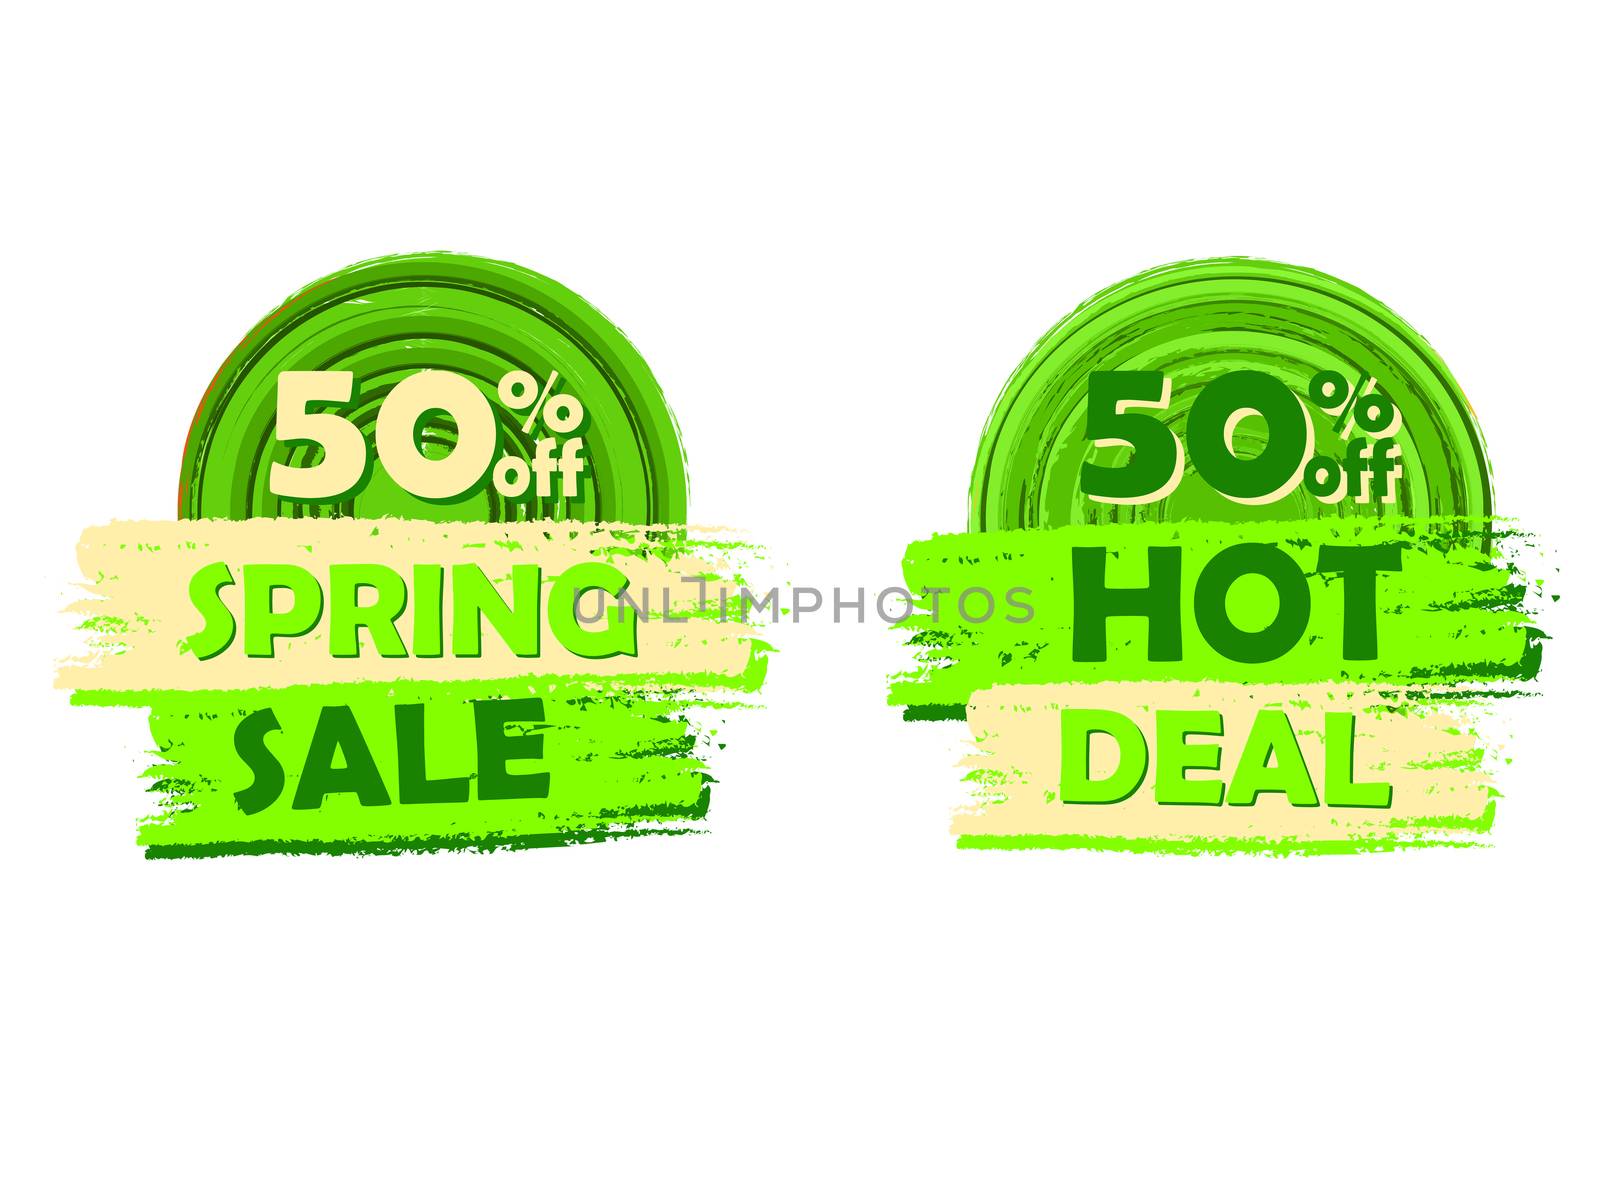 50 percentages off spring sale and hot deal banners - text in green circular drawn labels, business seasonal shopping concept